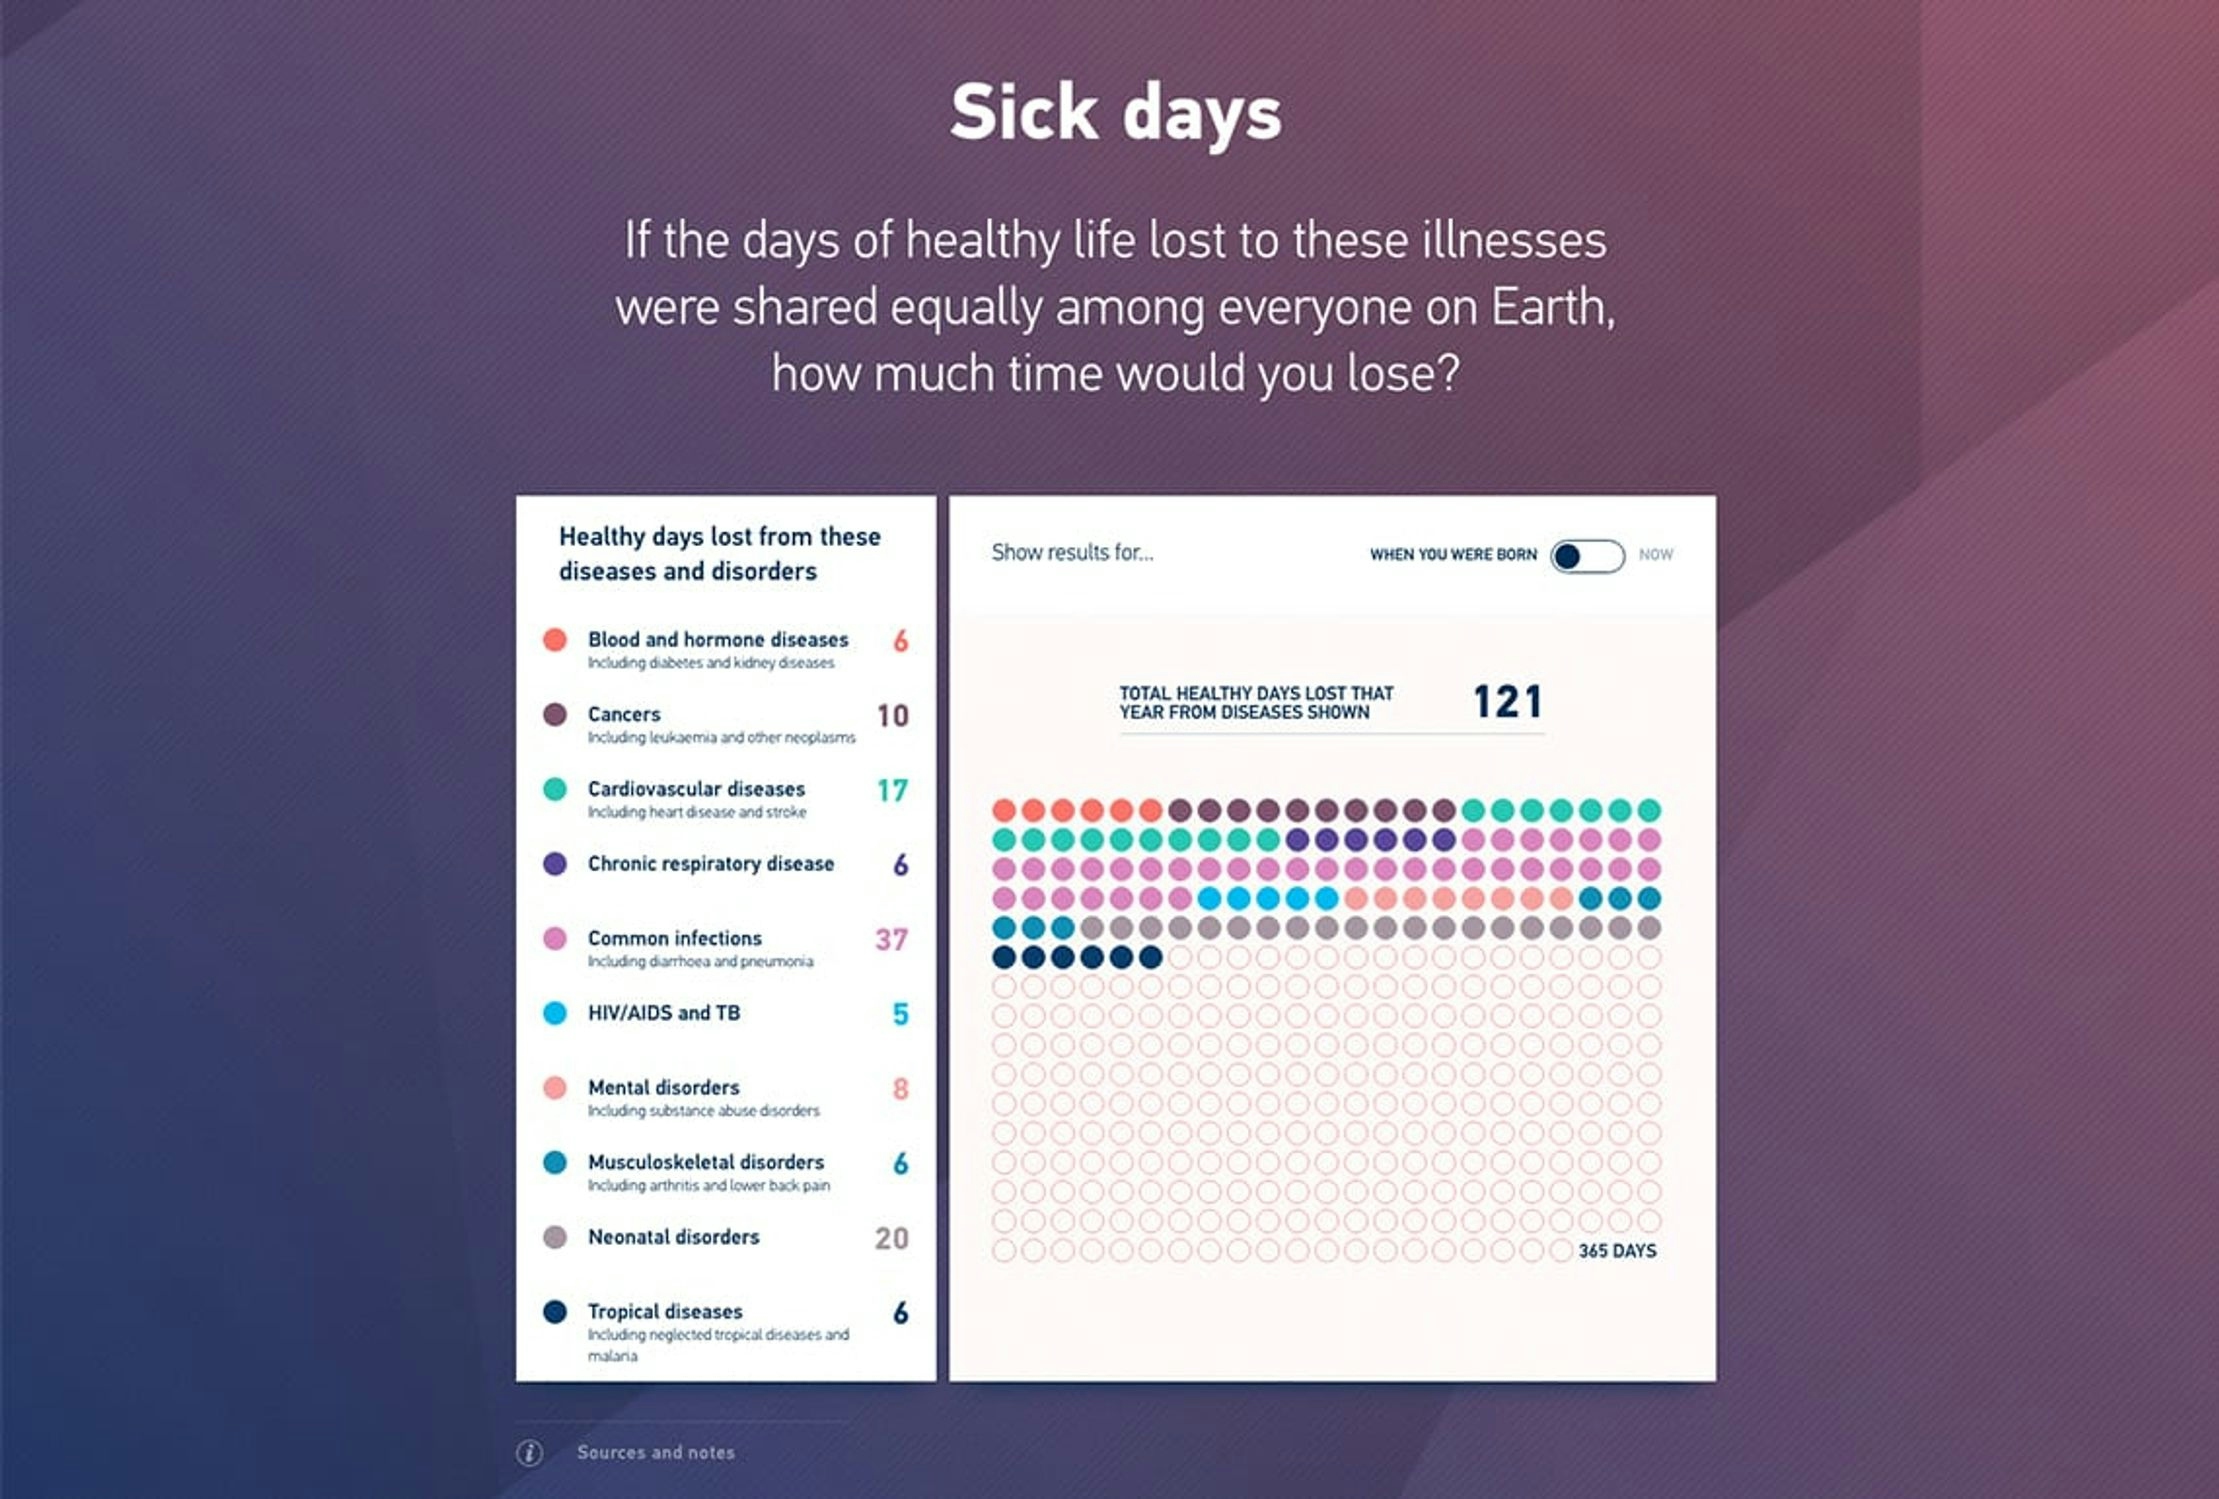 A screenshot of a Global Health Check visualization that shows if all the healthy life lost on Earth due to illnesses wash shared equally among everyone, how much the user would have lost in their life.